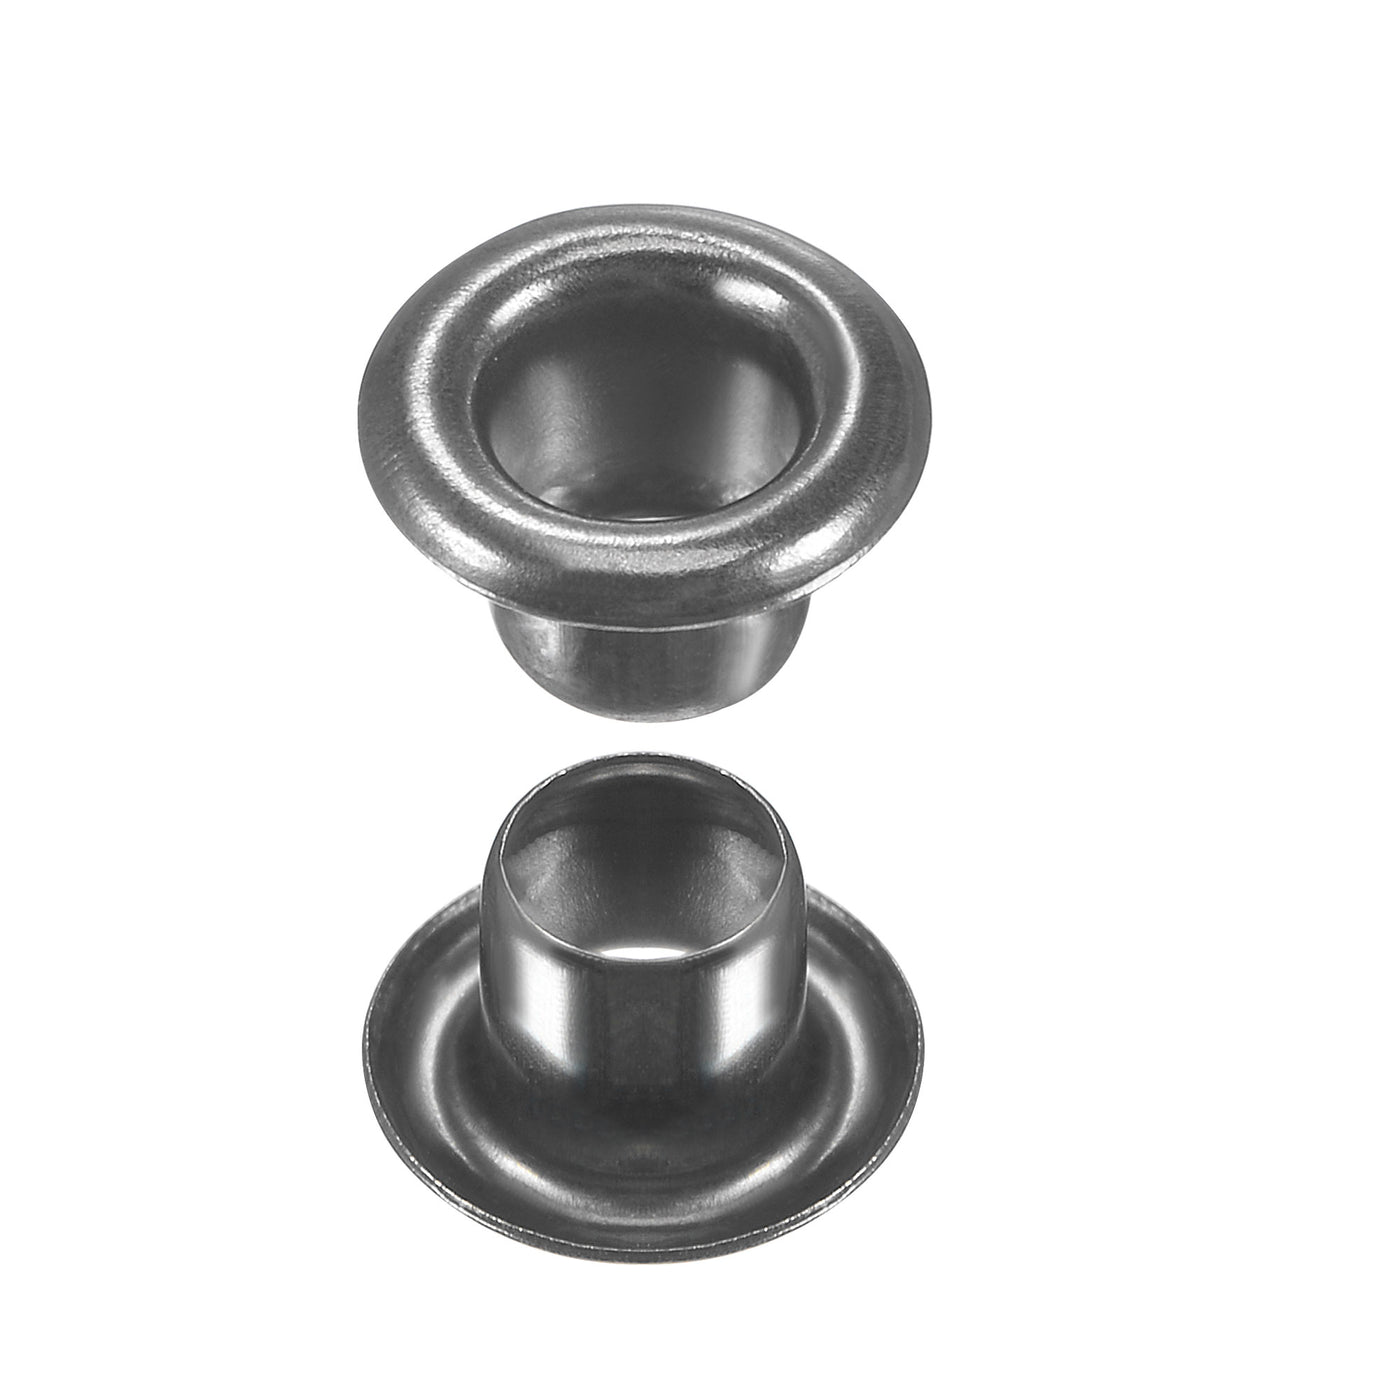 uxcell Uxcell Eyelet with Washer 7x3.5x4mm Copper Grommet Chrome Plated Black 100 Set